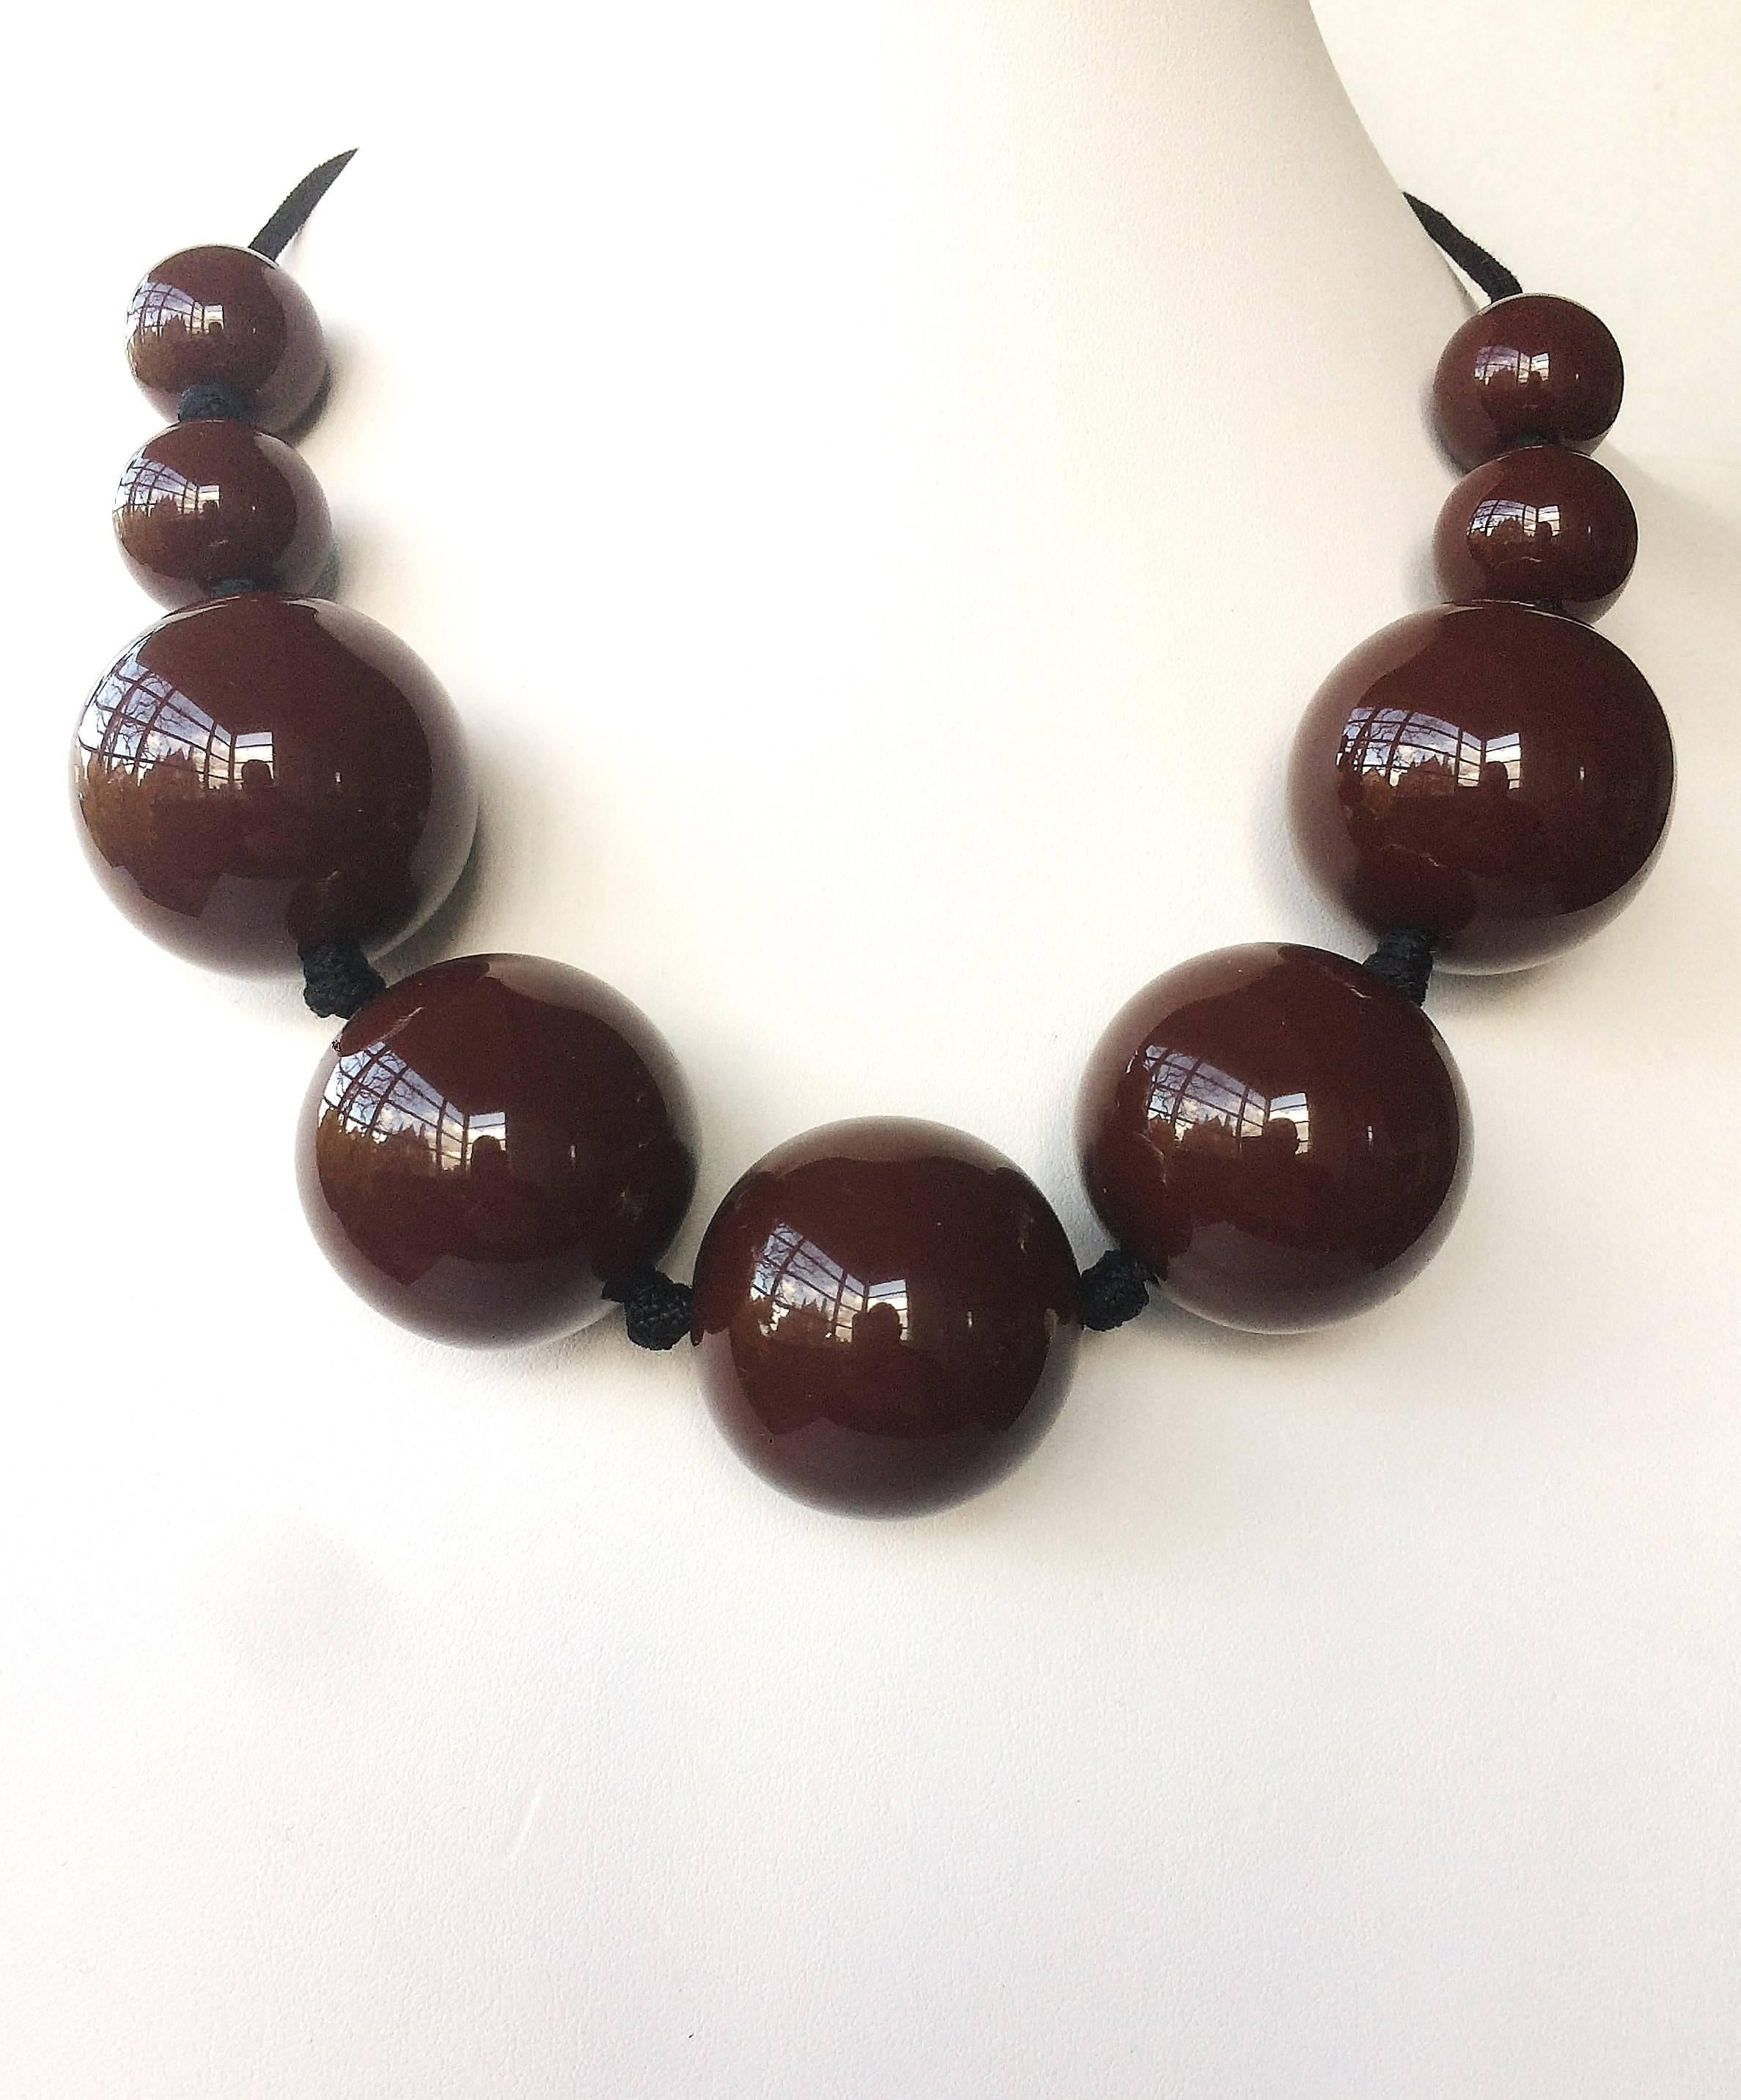 Made from traditional brown lacquer over Japanese hardwood, this graduated necklace of soft, warm coloured and high gloss spheres is one of the iconic designs by celebrated Elsa Peretti for Tiffany & Co. Threaded on finely plaited and woven silk